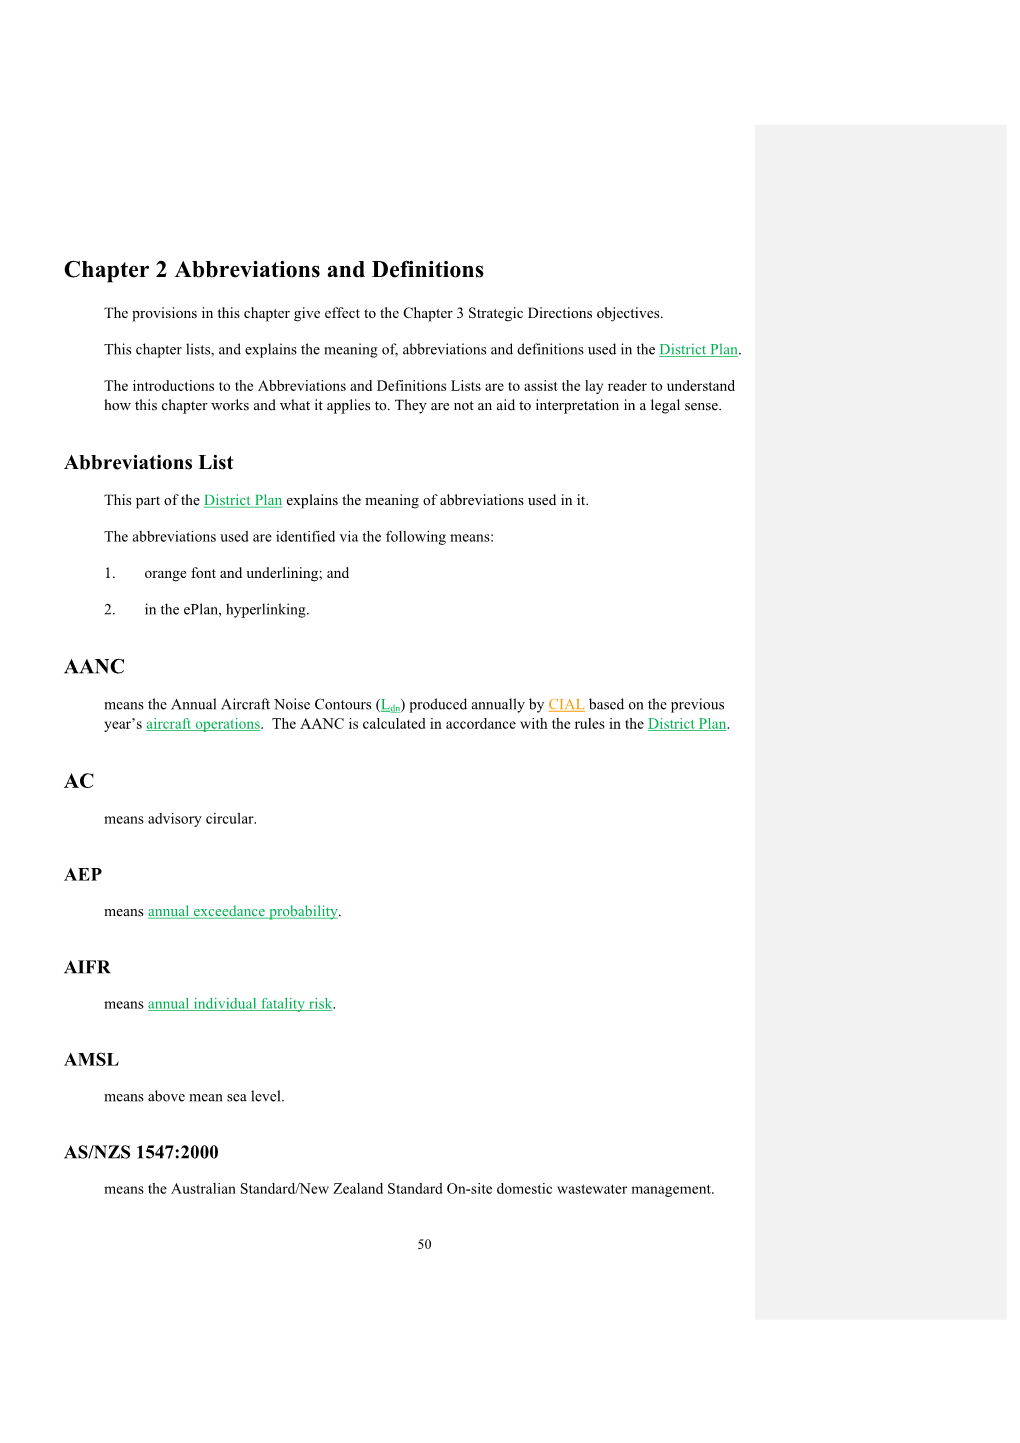 Chapter 2 Abbreviations and Definitions